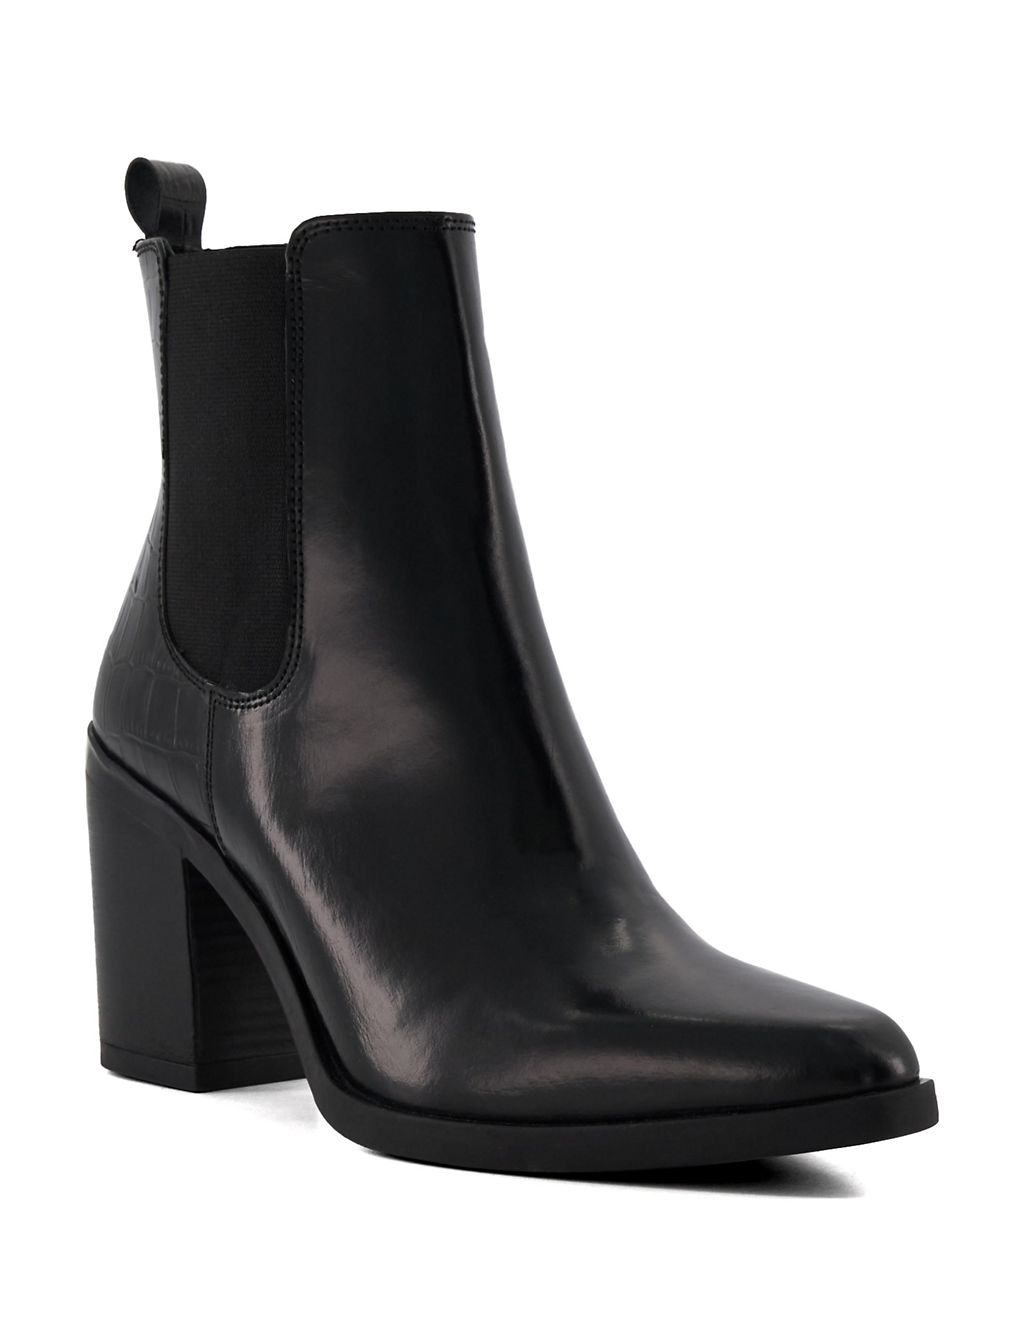 Leather Block Heel Ankle Boots | Dune London | M&S